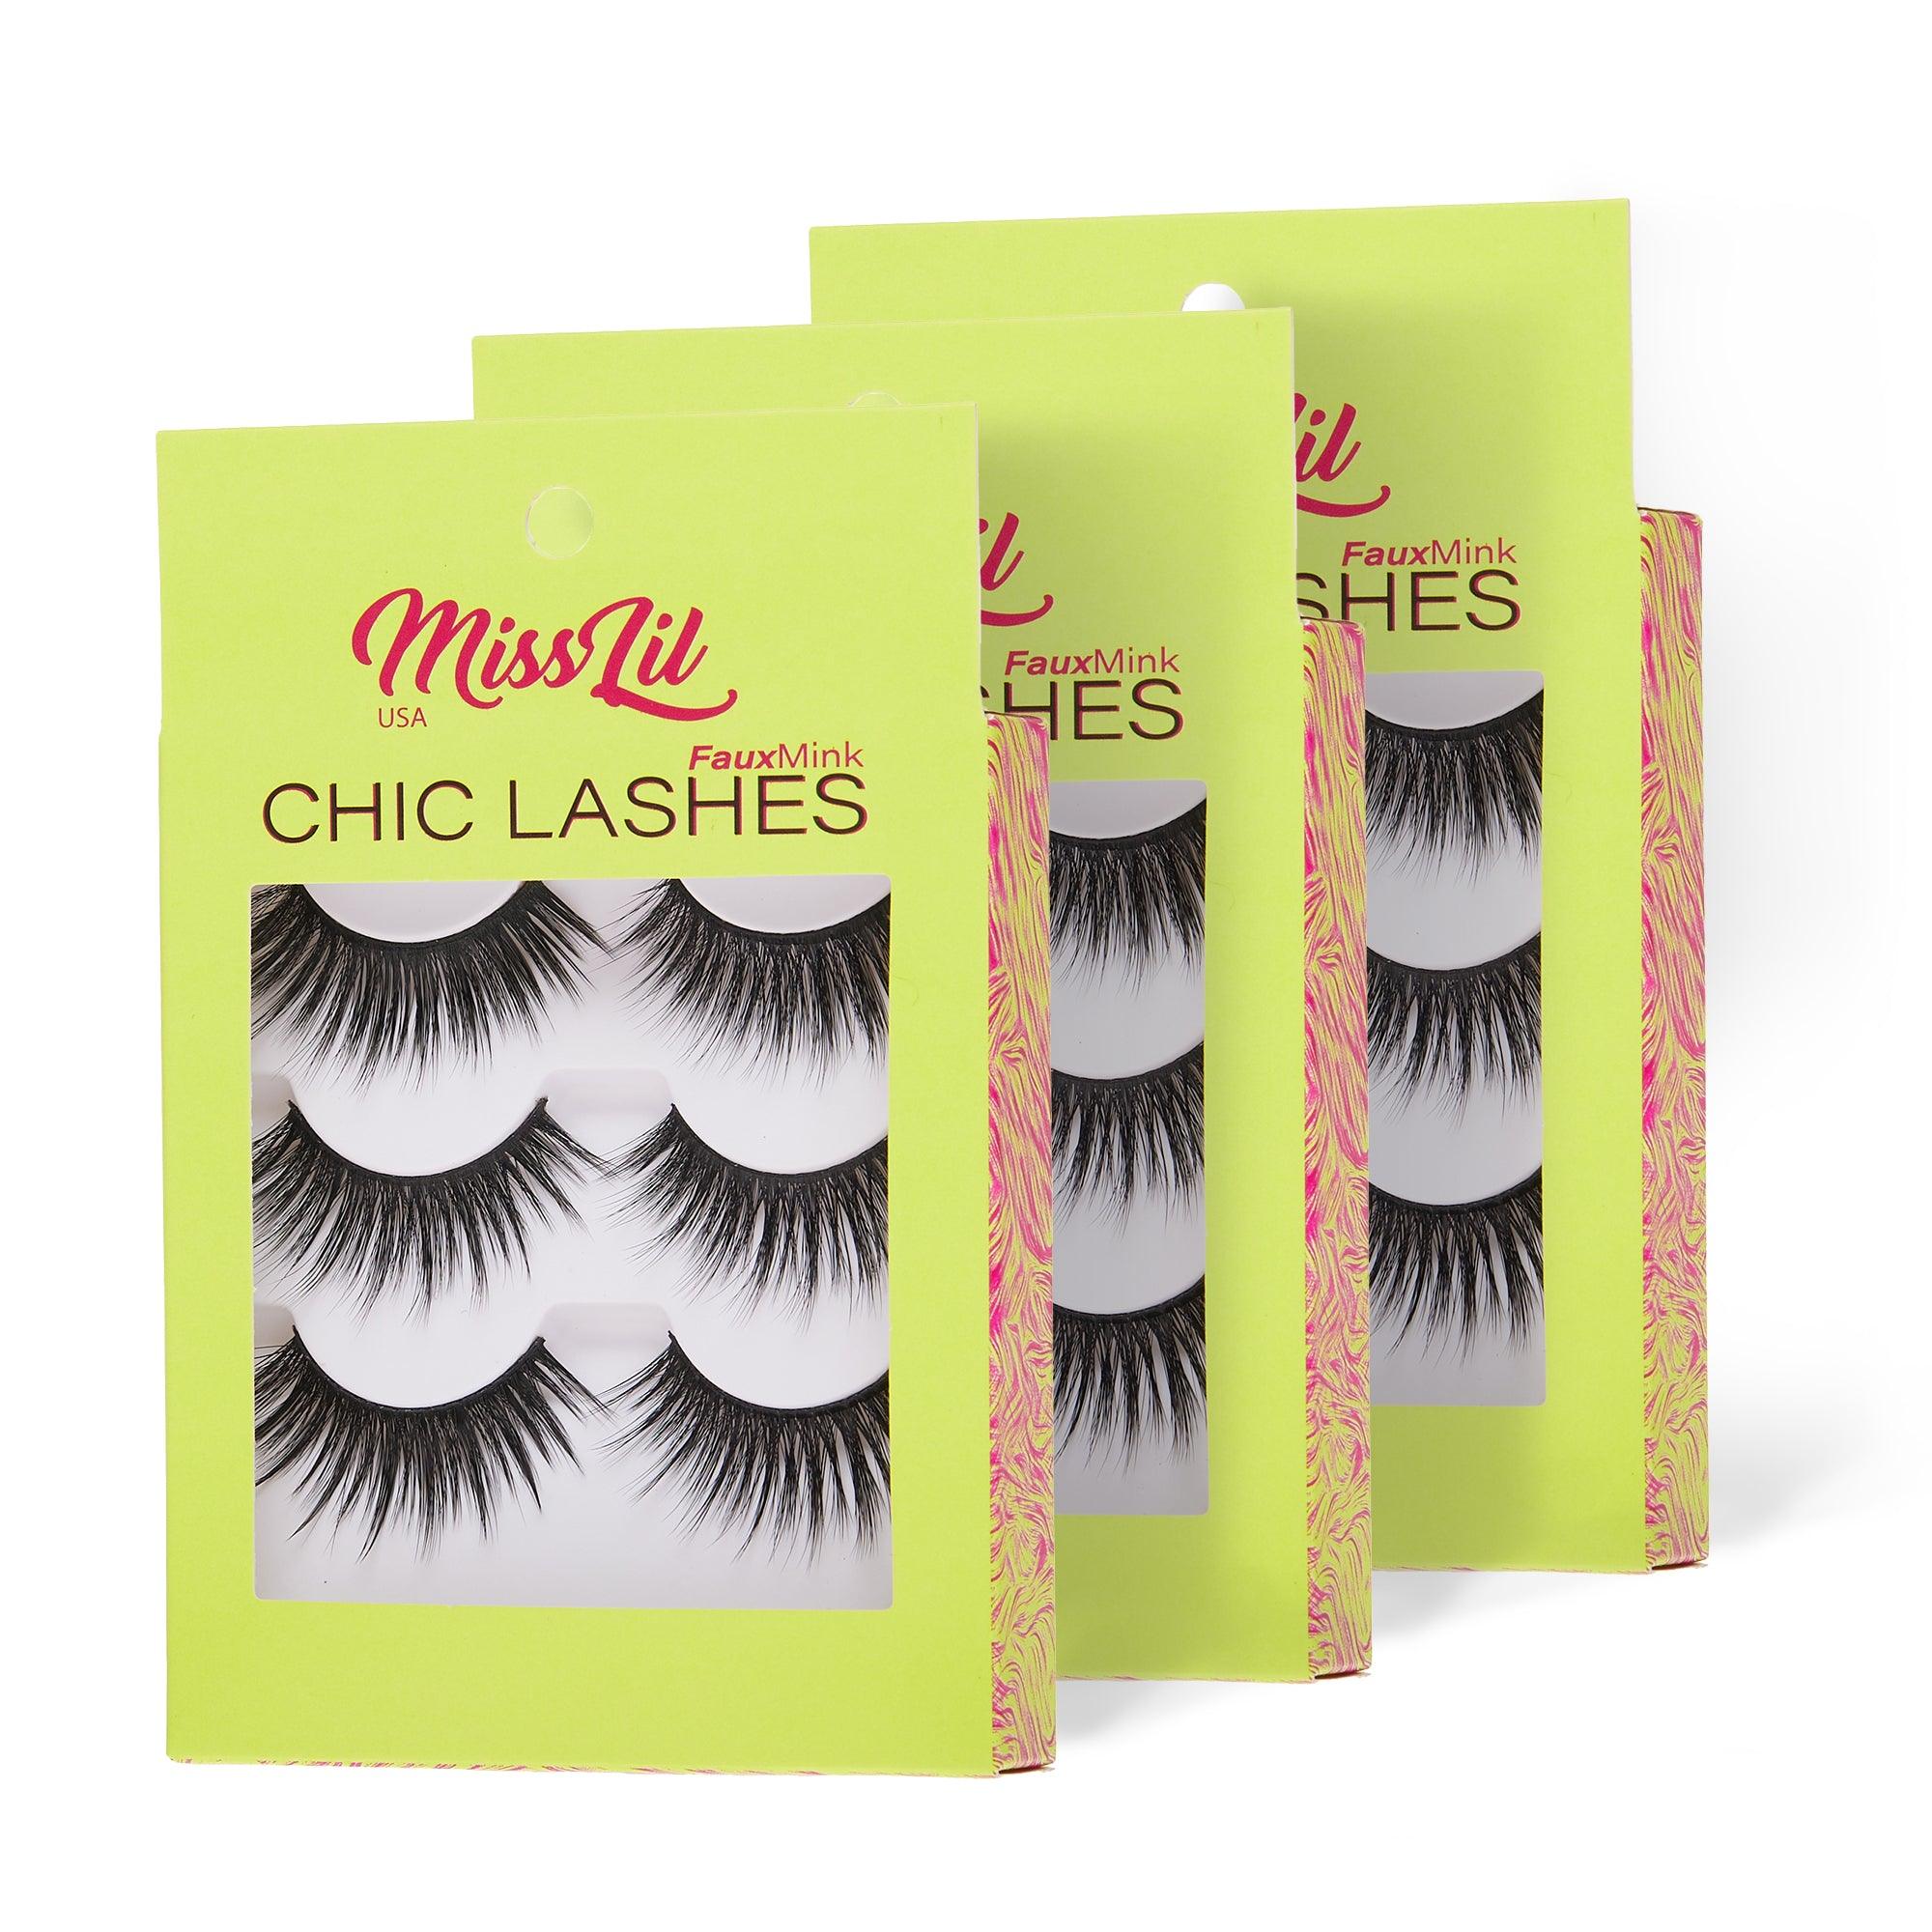 3-Pairs Lashes-Chic Lashes Collection #17 (Pack of 12) - Miss Lil USA Wholesale